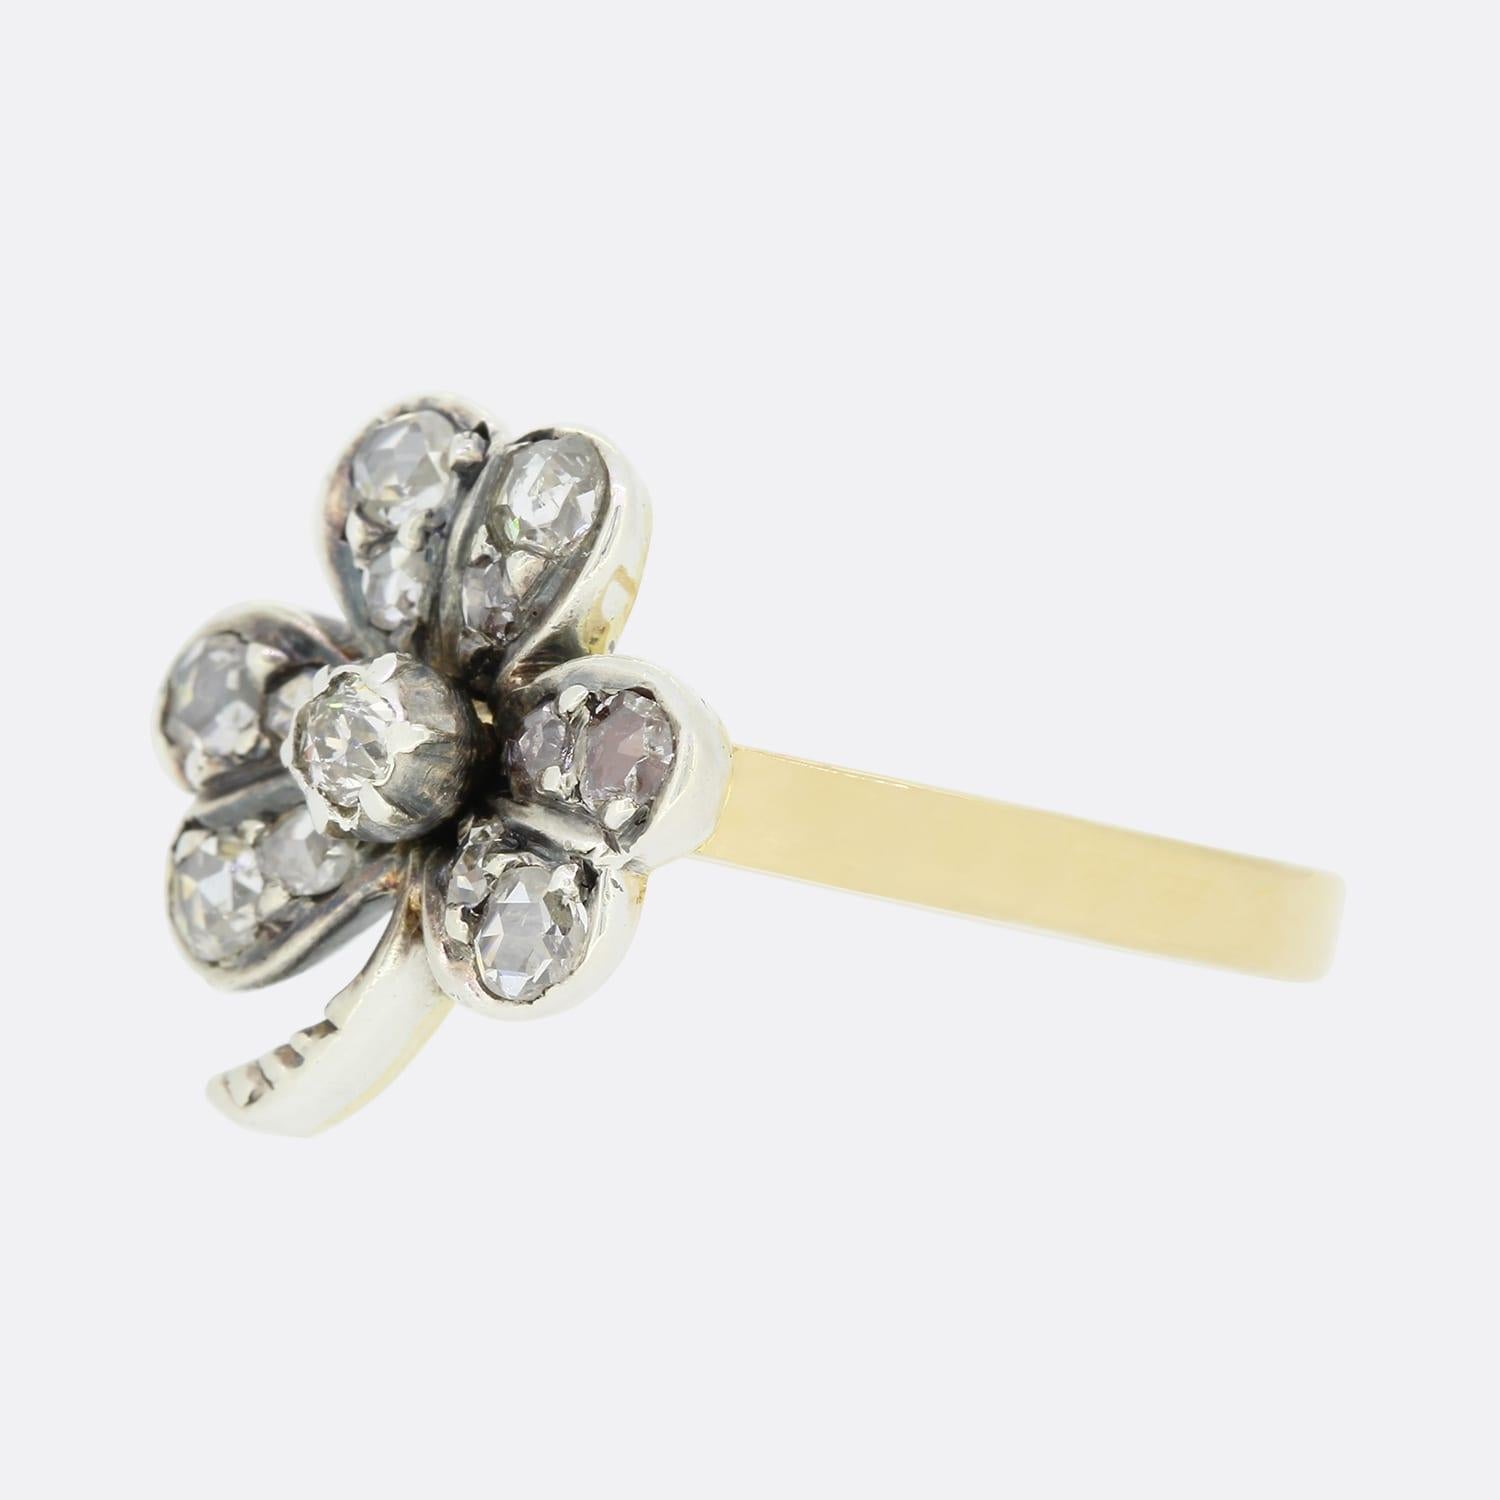 This is a beautiful, 18ct yellow gold diamond clover ring. The ring features a central old cut diamond and surrounded by twelve rose cut diamonds in a clover motif crafted in silver with an 18ct yellow gold band.

The ring started life as a